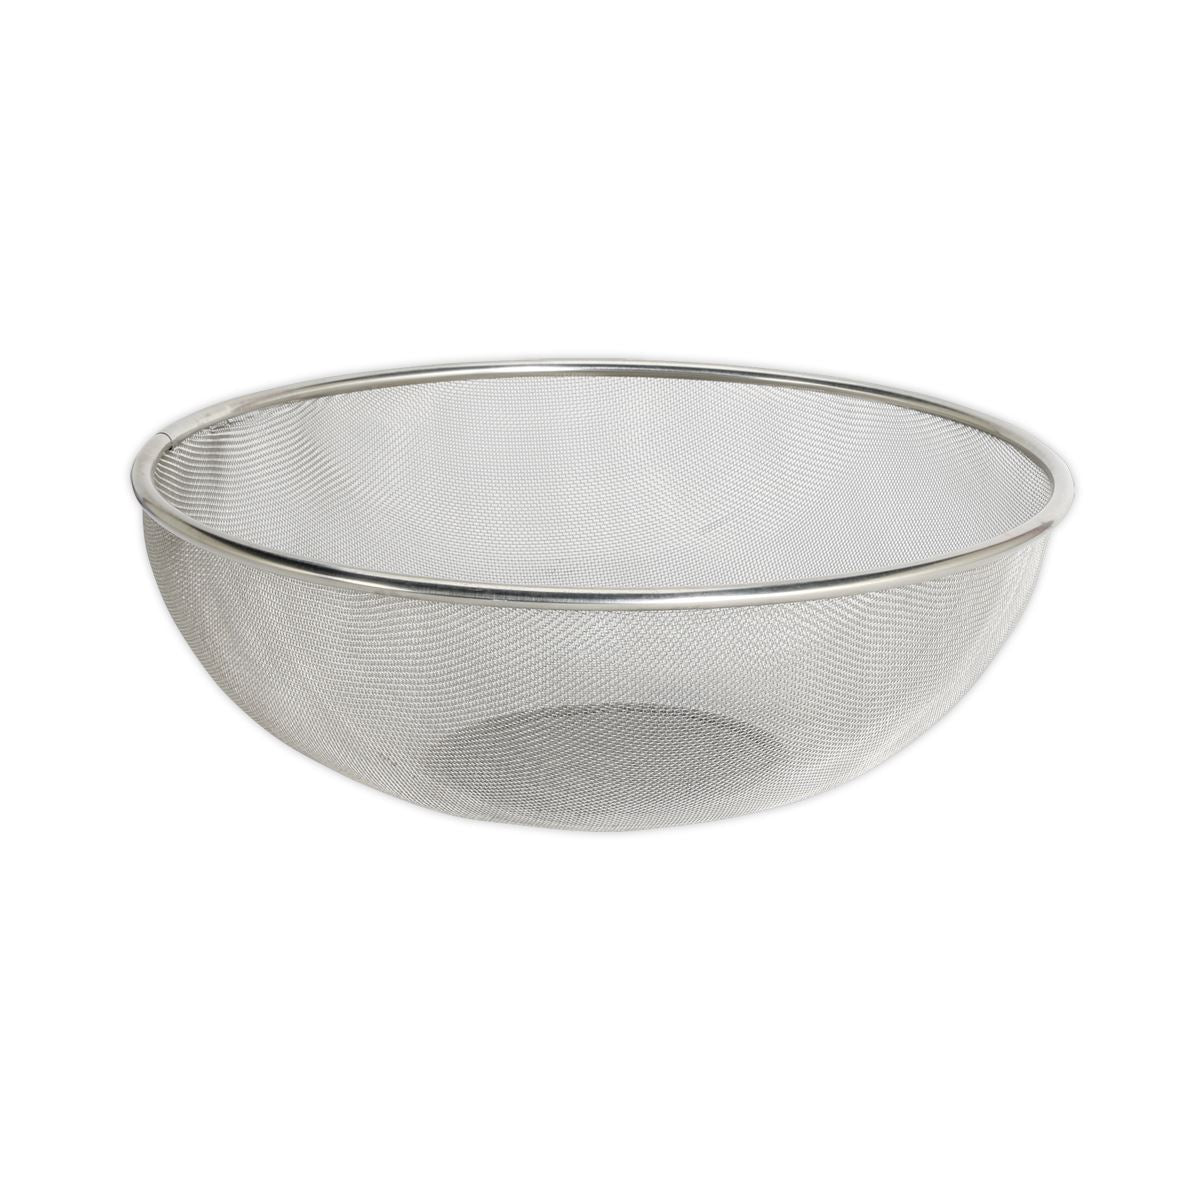 Sealey Parts Strainer Magnetic Stainless Steel